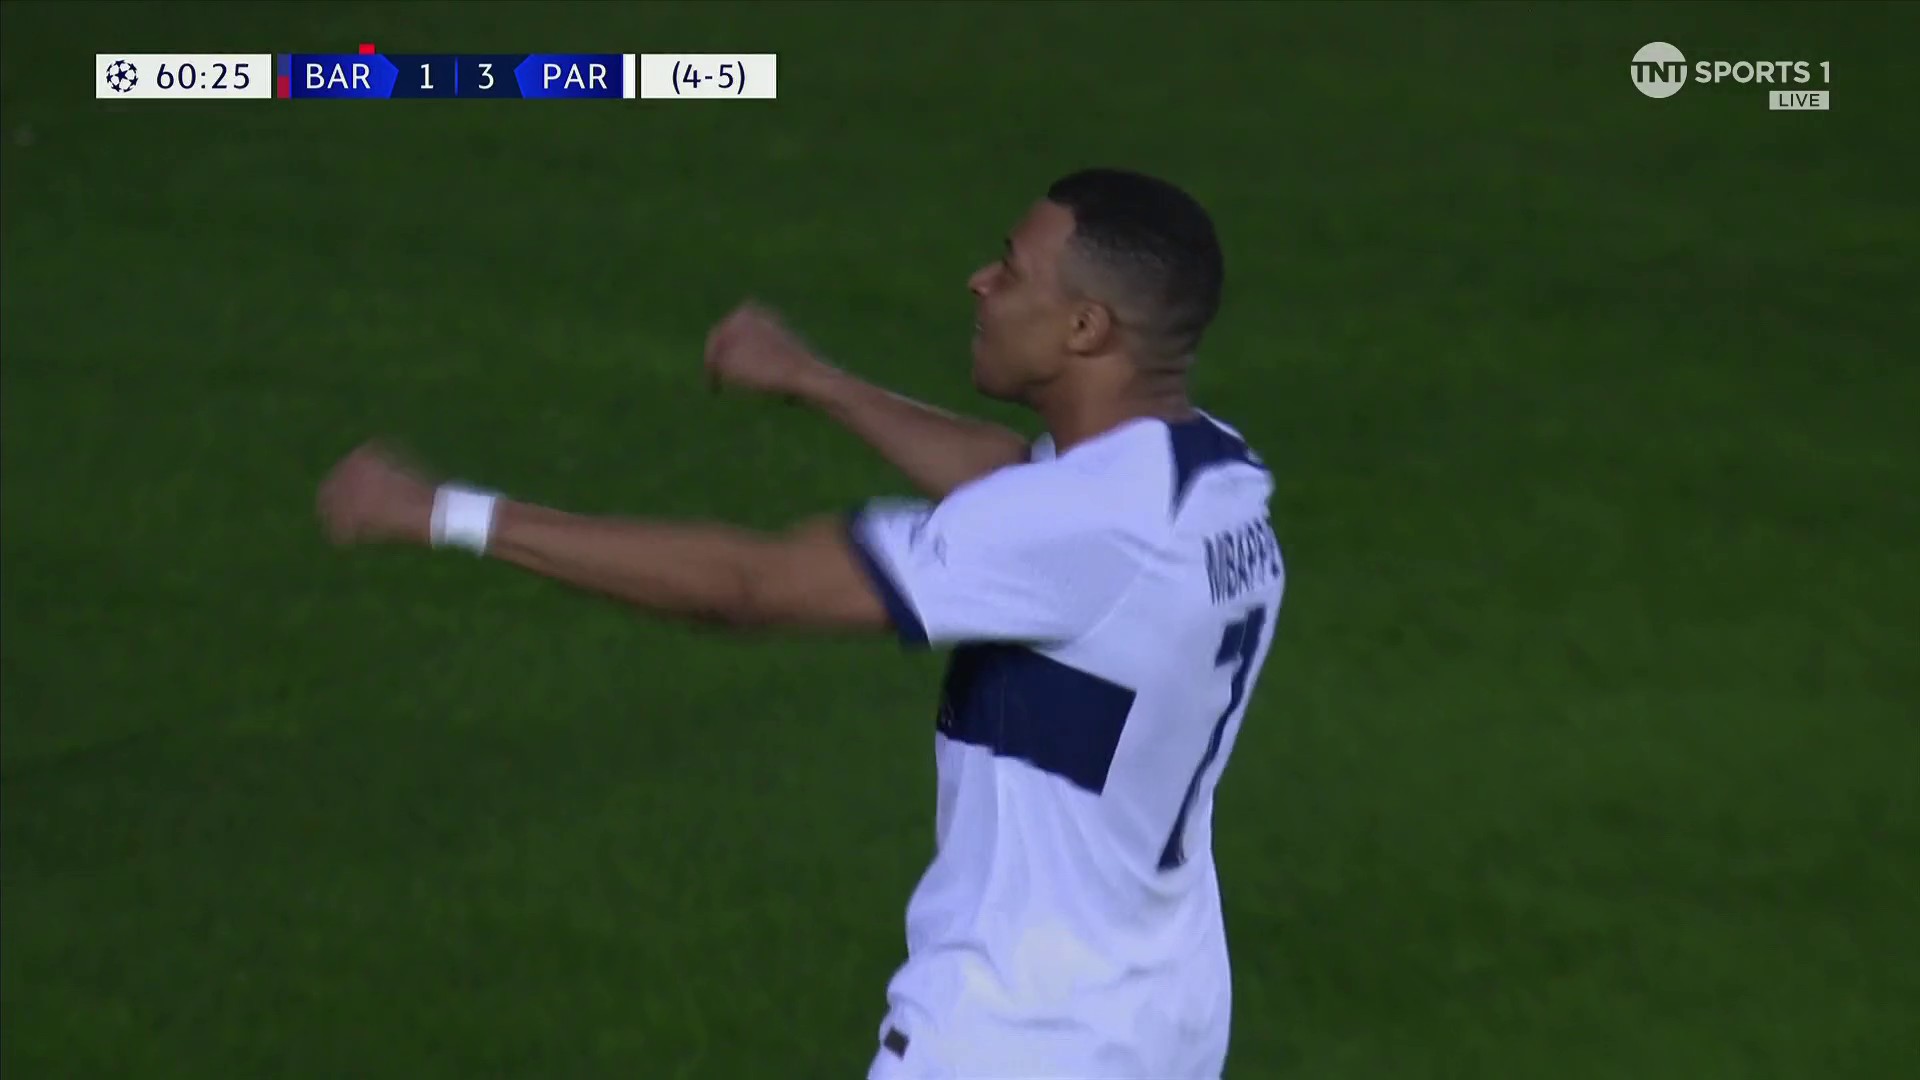 WATCH: PSG now 5-4 up as Kylian Mbappe converts penalty against Barcelona